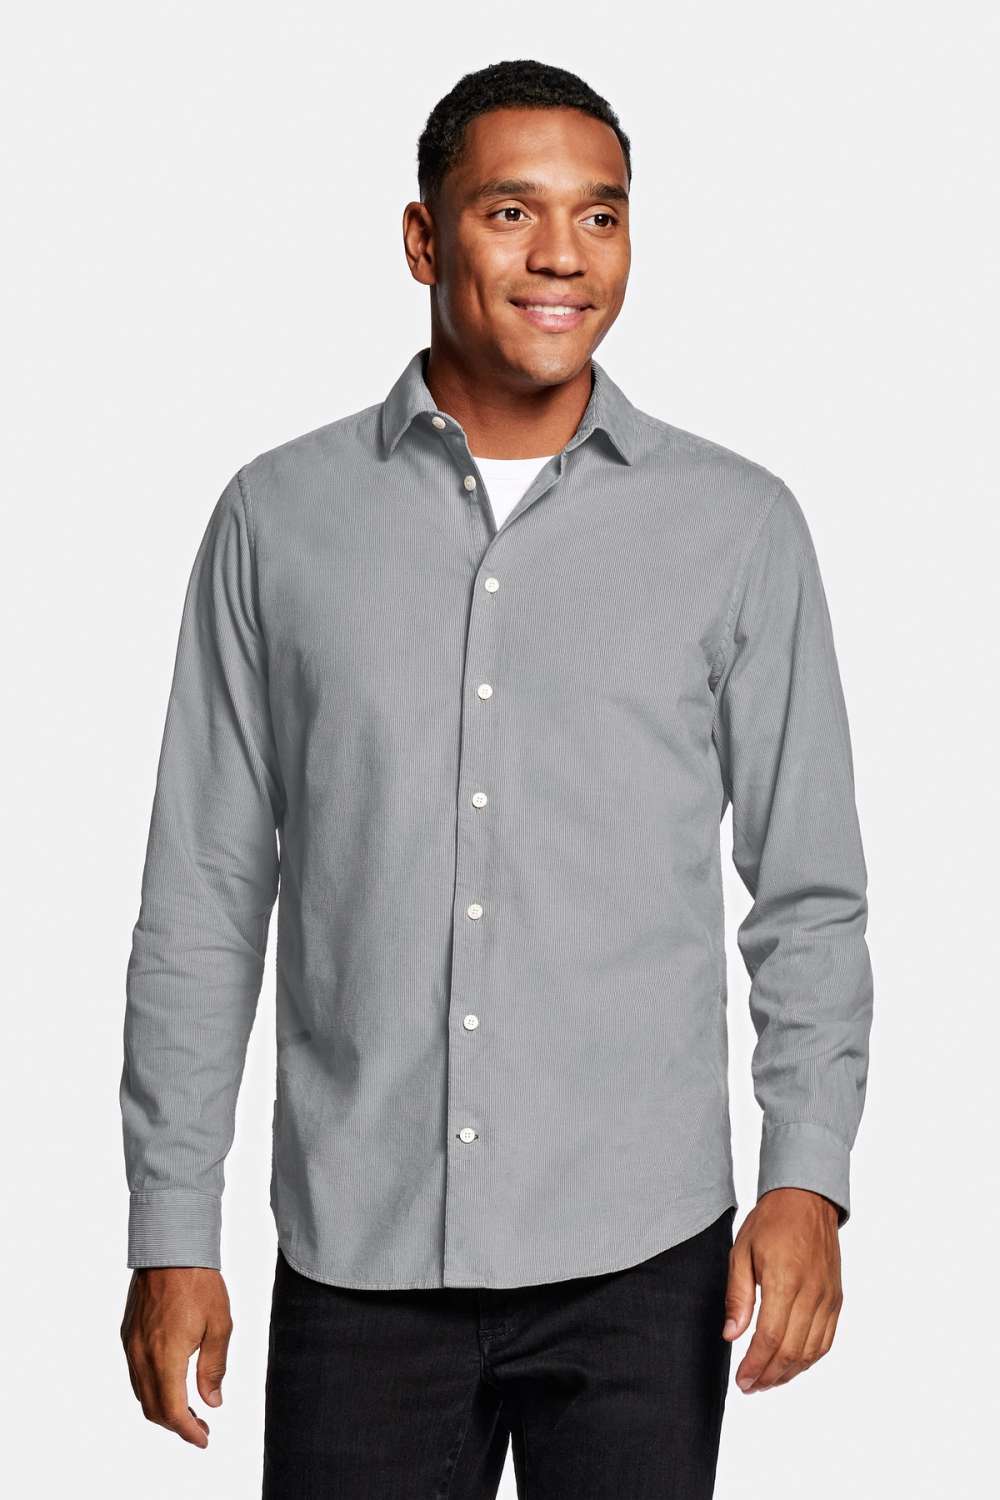 Oysters * The Cord Shirt